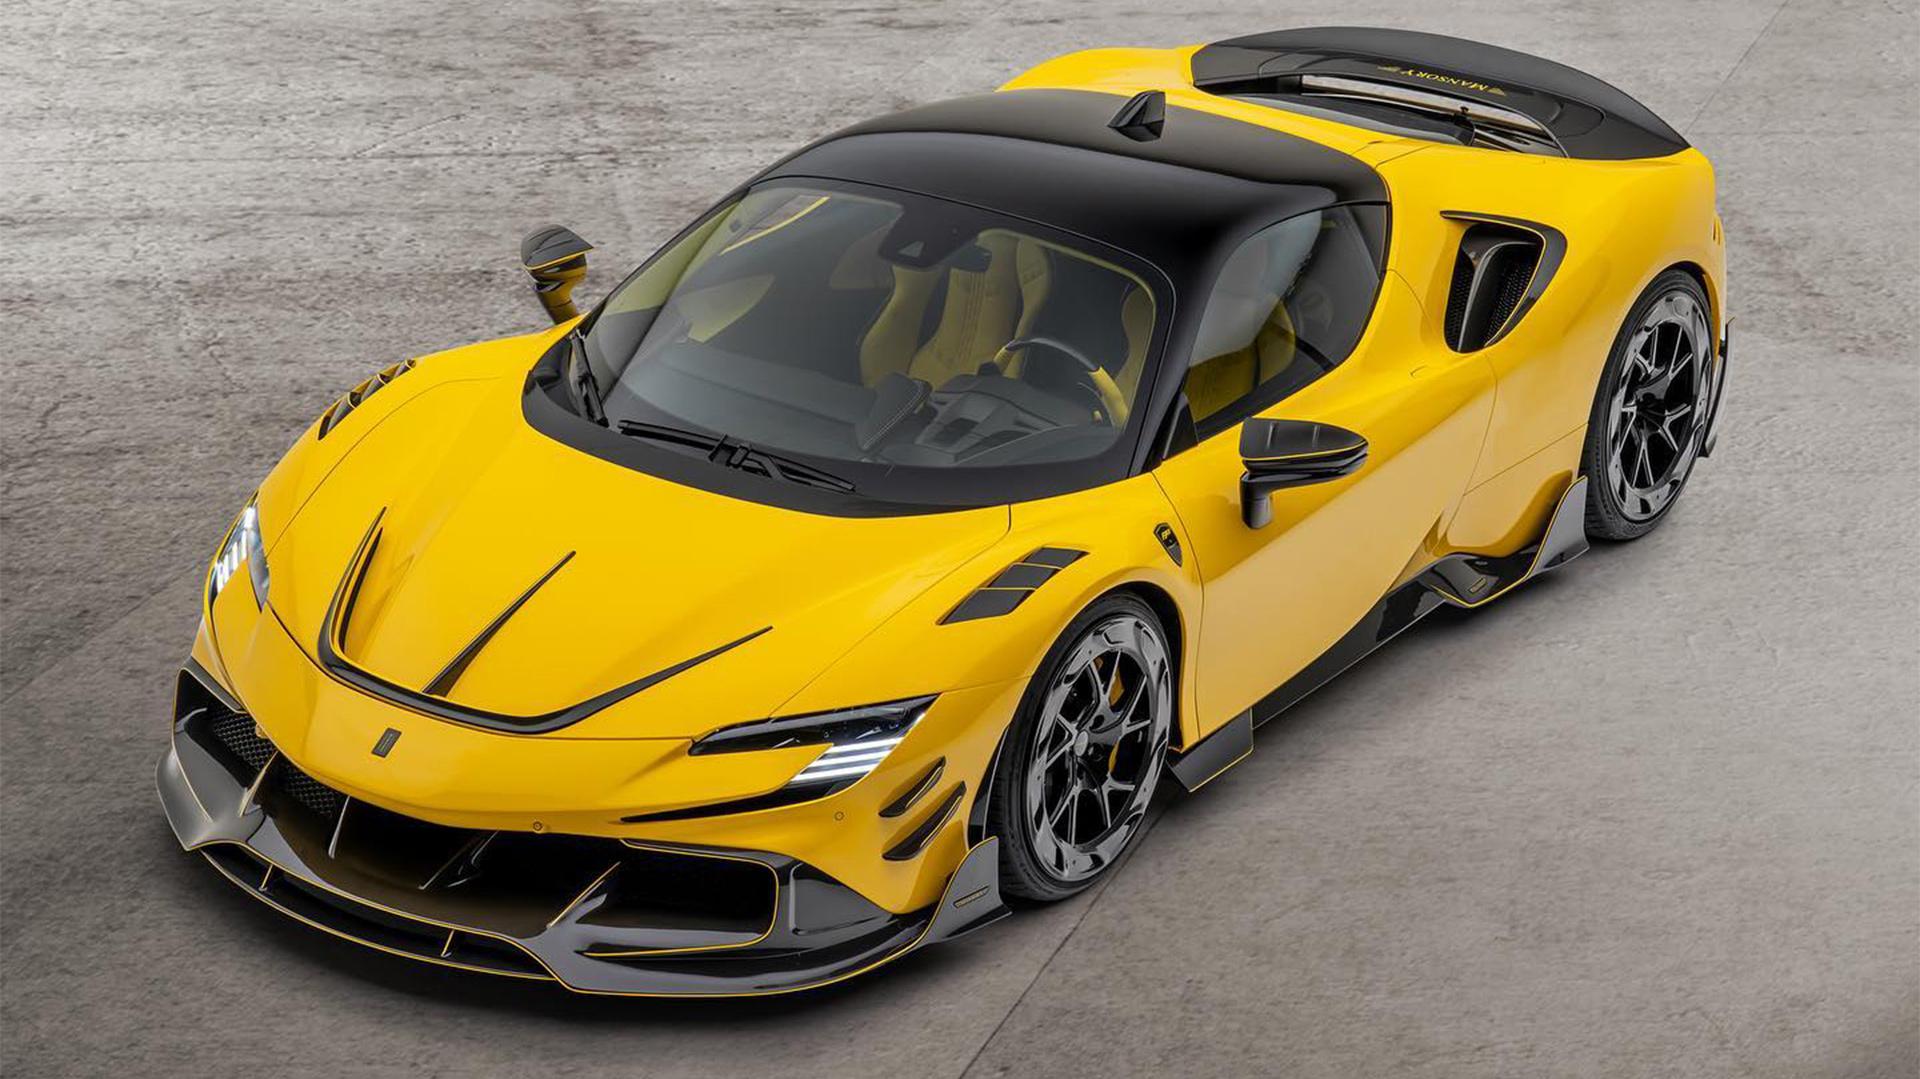 Mansory S Softkit For The Ferrari Sf90 Stradale Is Still Quite